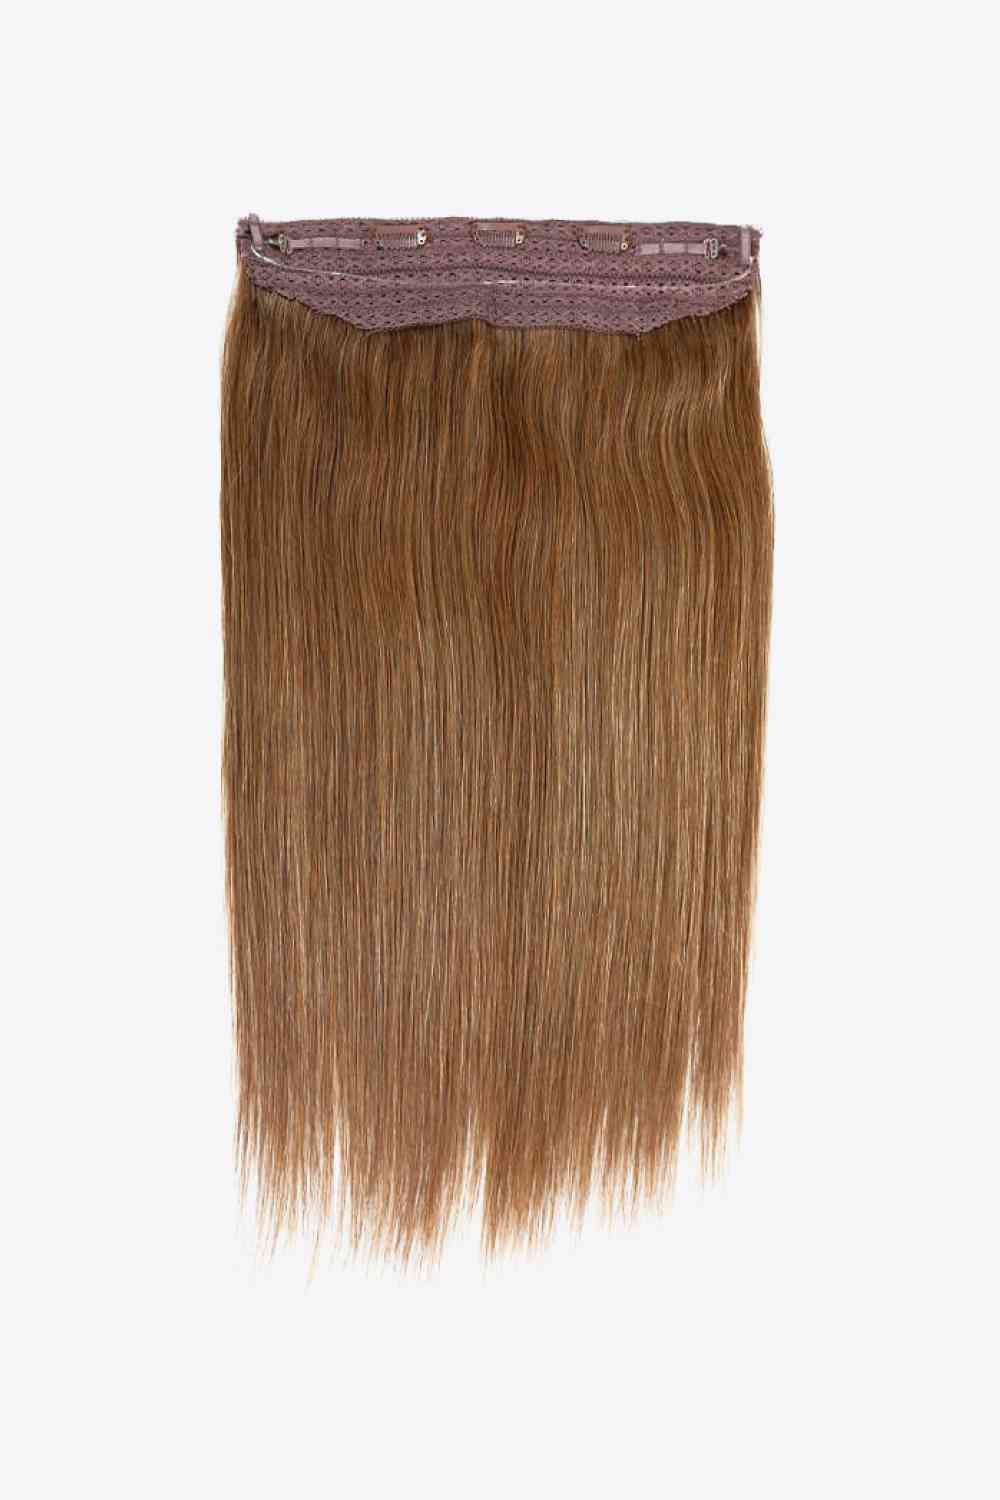 18" 80g Long Straight Indian Human Halo Hair Brown One Size 